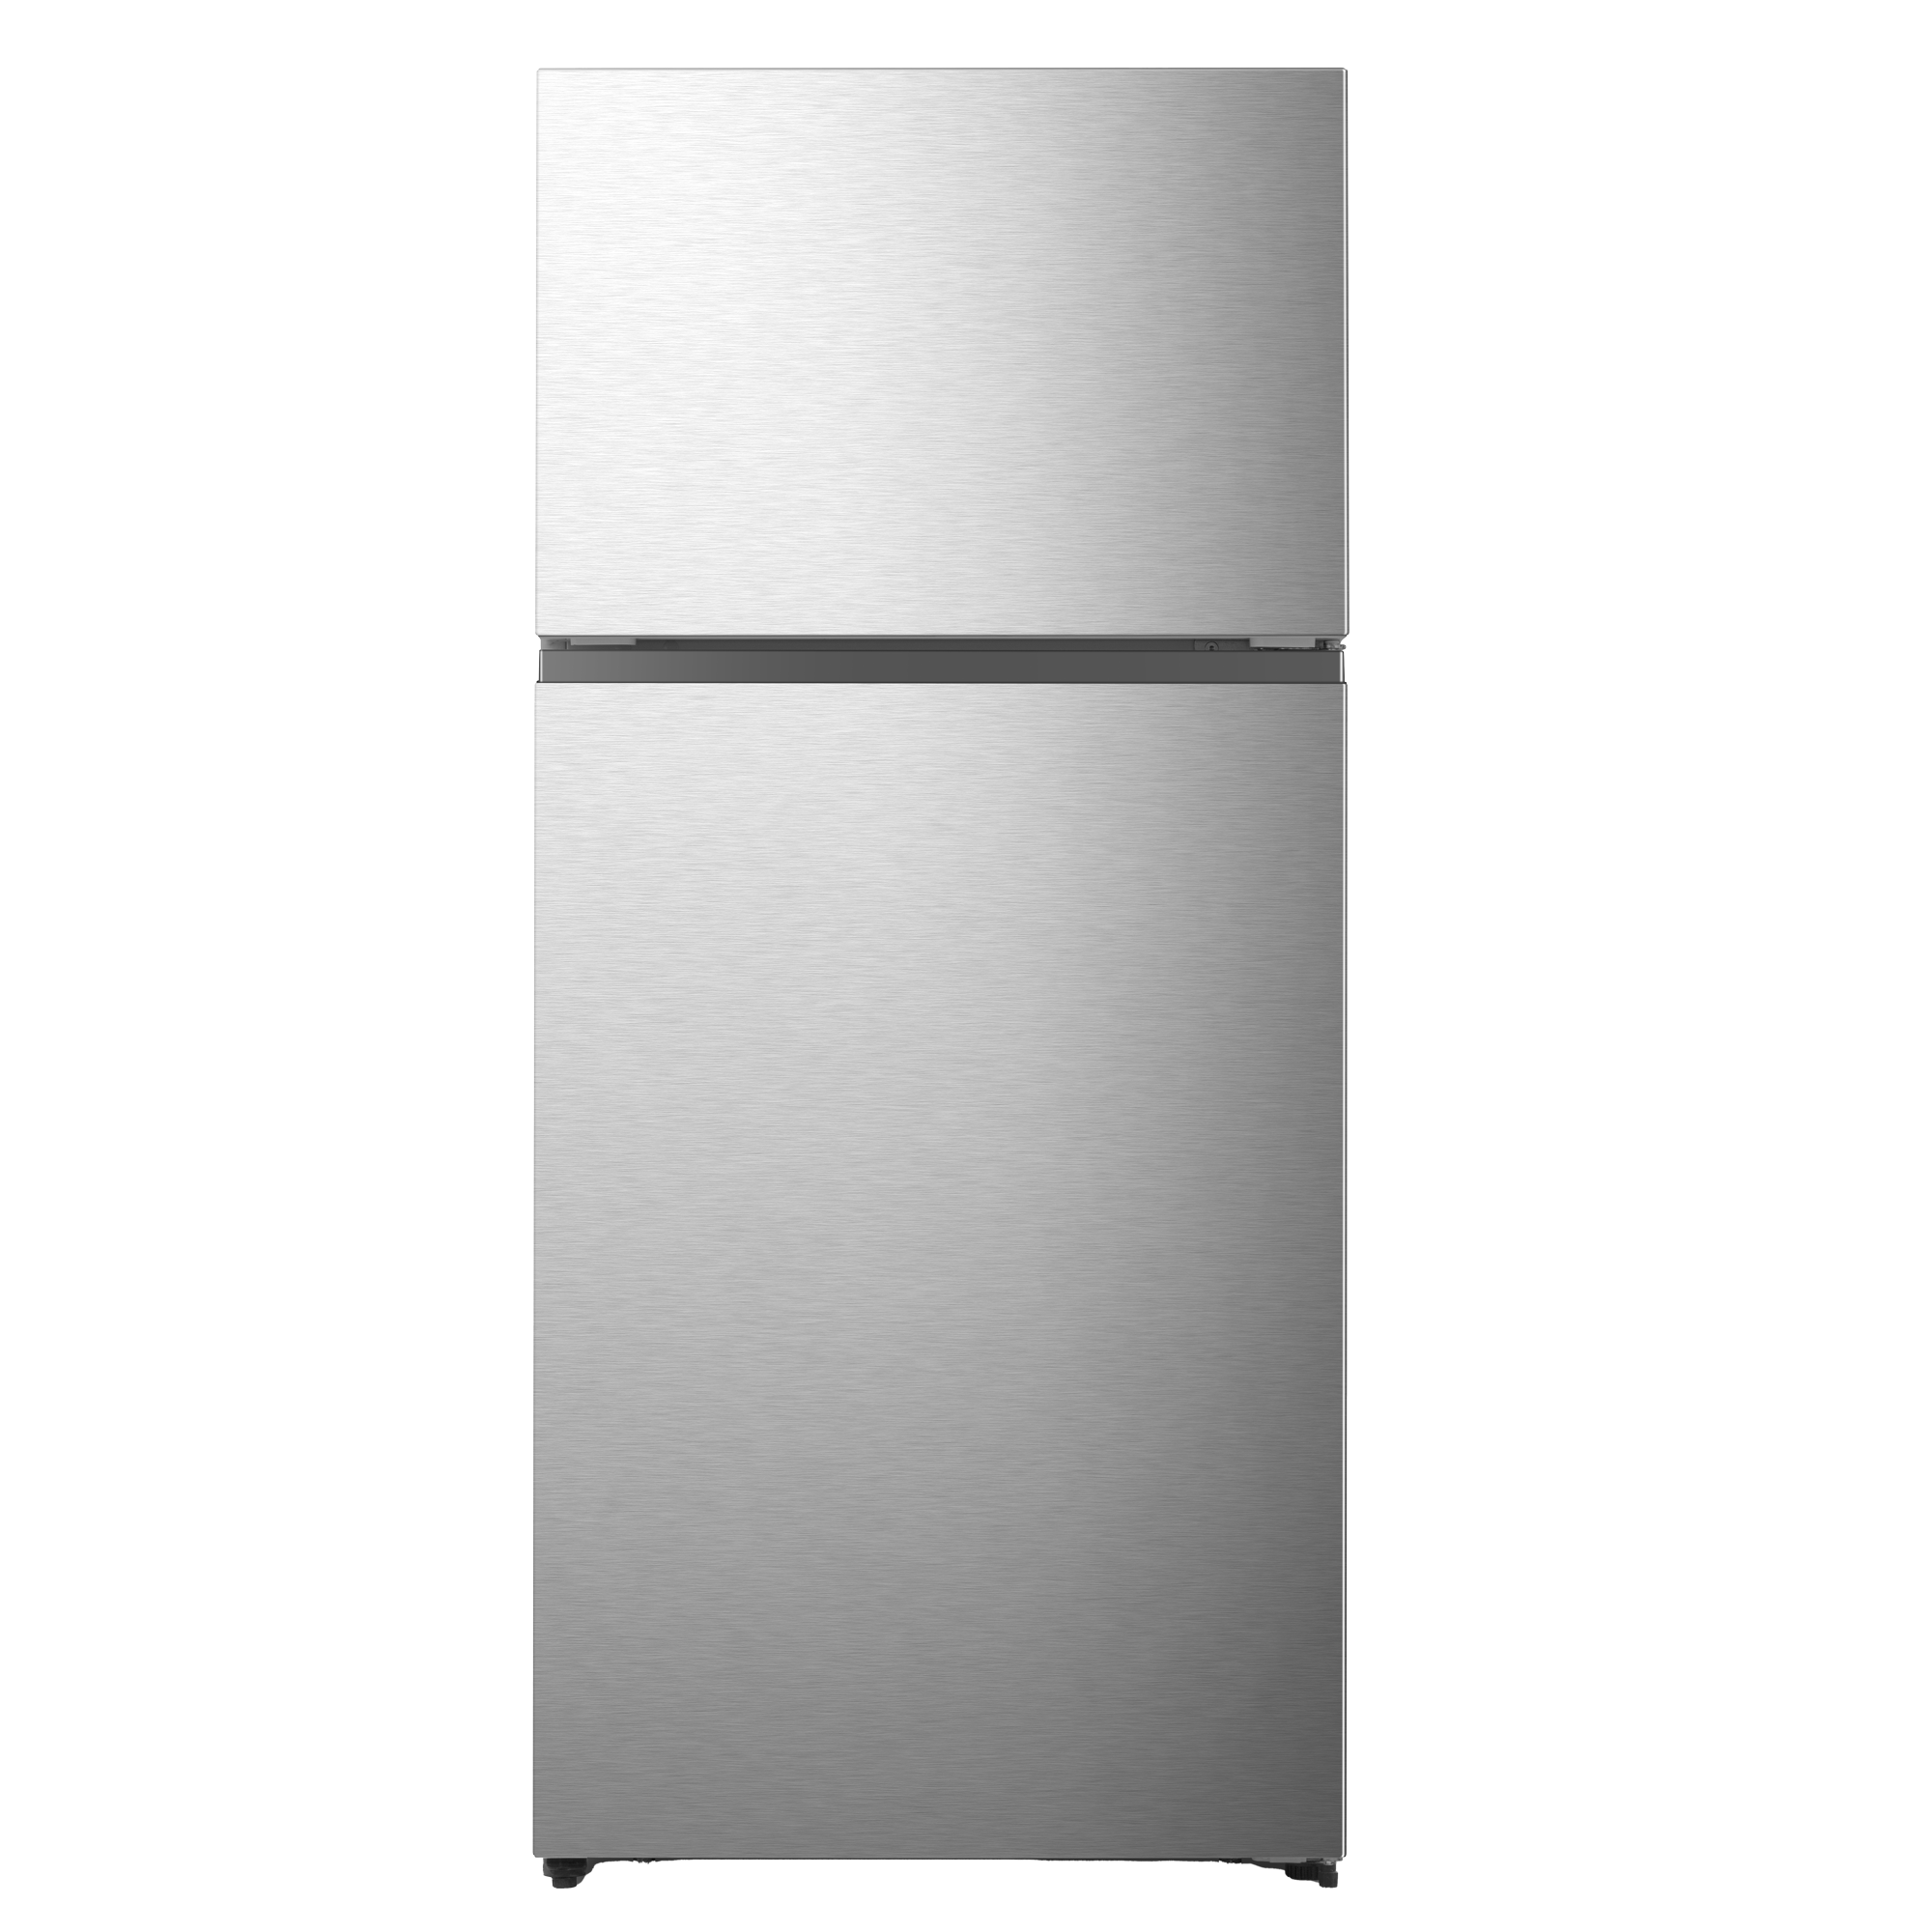 Hisense 18 cu Ft Top Mount Freezer Refrigerator Silver With Ice 